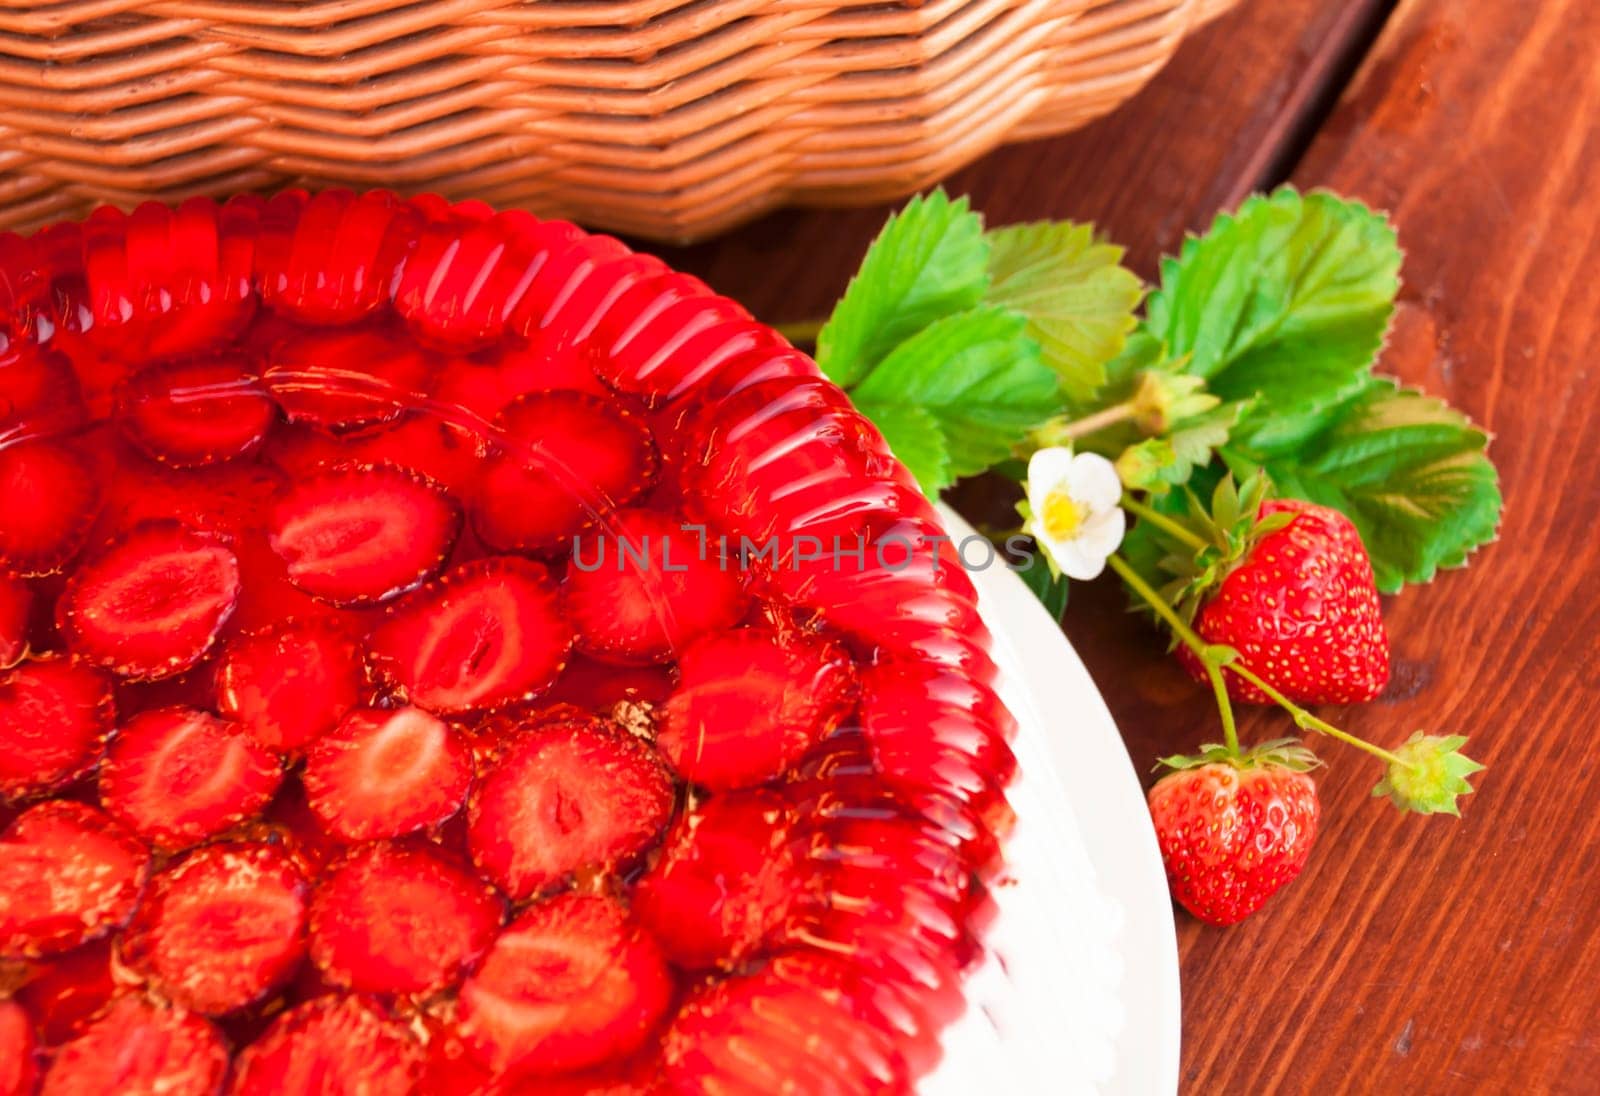 Tart with strawberries and whipped cream decorated with mint leaves. Wooden background. Top view. Near iron